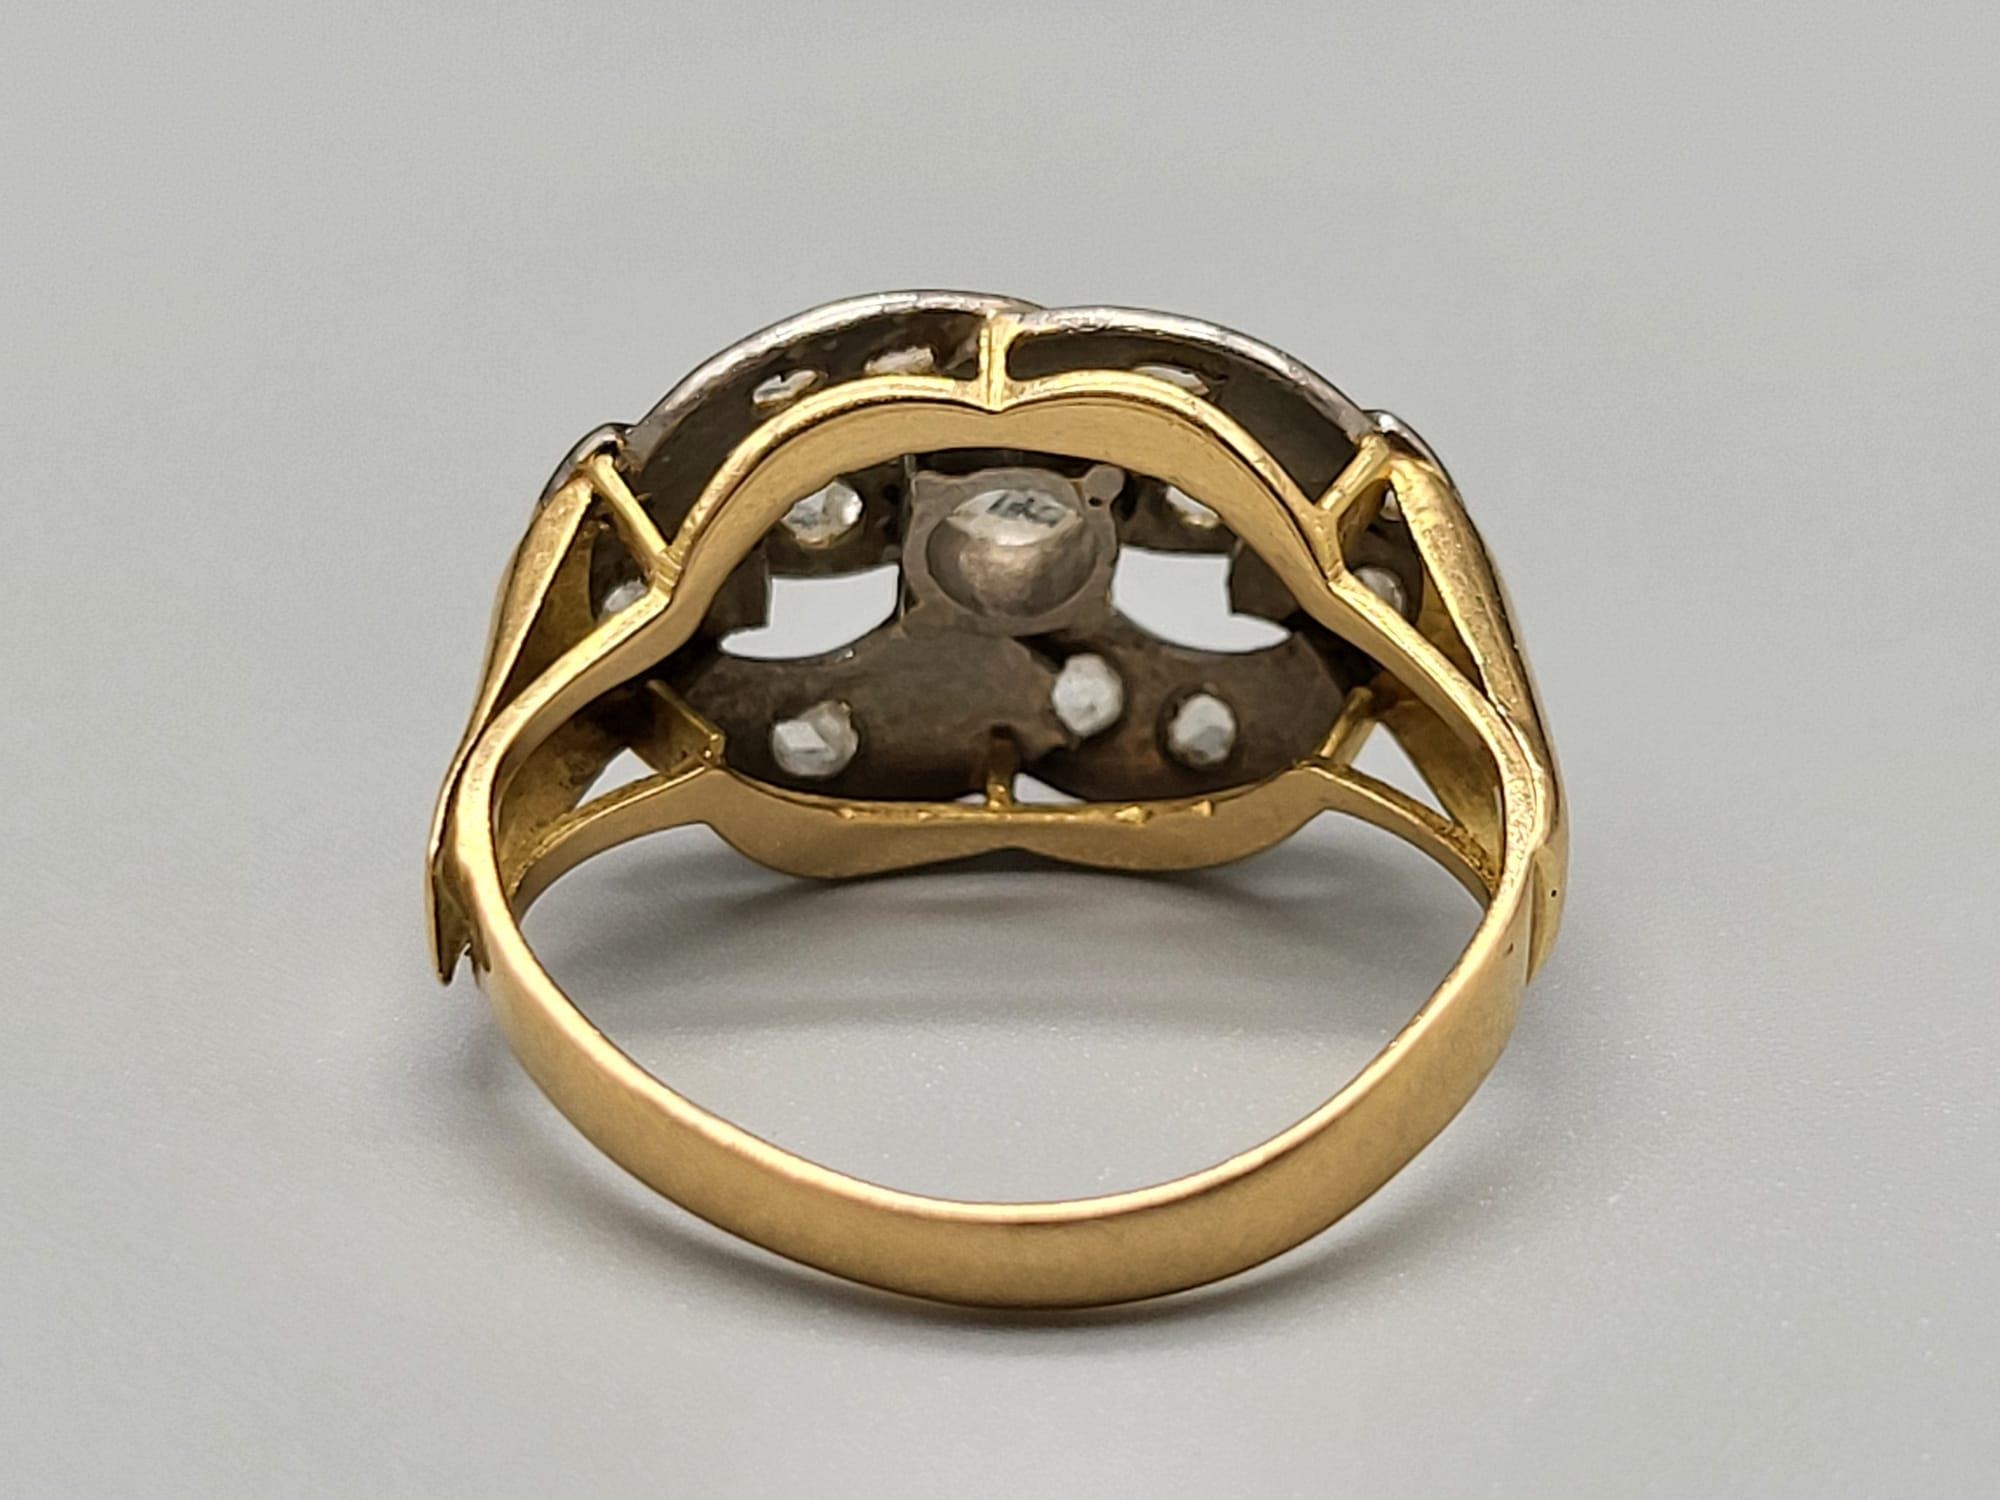 An Art Deco 18 K yellow gold ring with Diamonds. Ring size: M/N, weight: 4.4 g. - Image 3 of 5